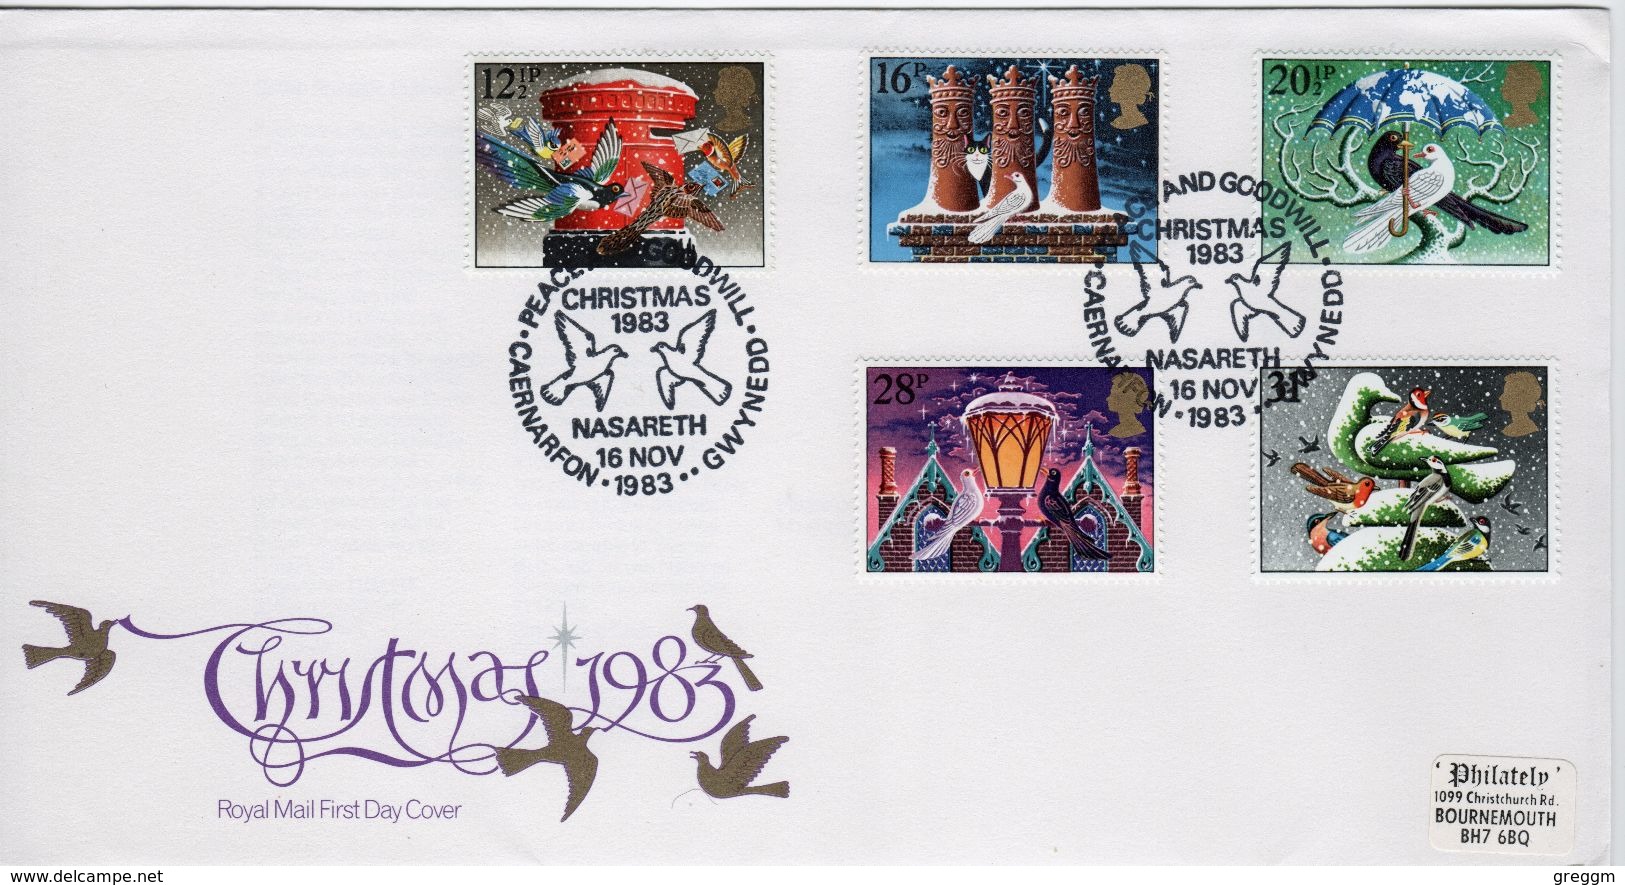 Great Britain First Day Cover To Celebrate Christmas With Nasareth Postmark 1983. - 1981-1990 Decimal Issues